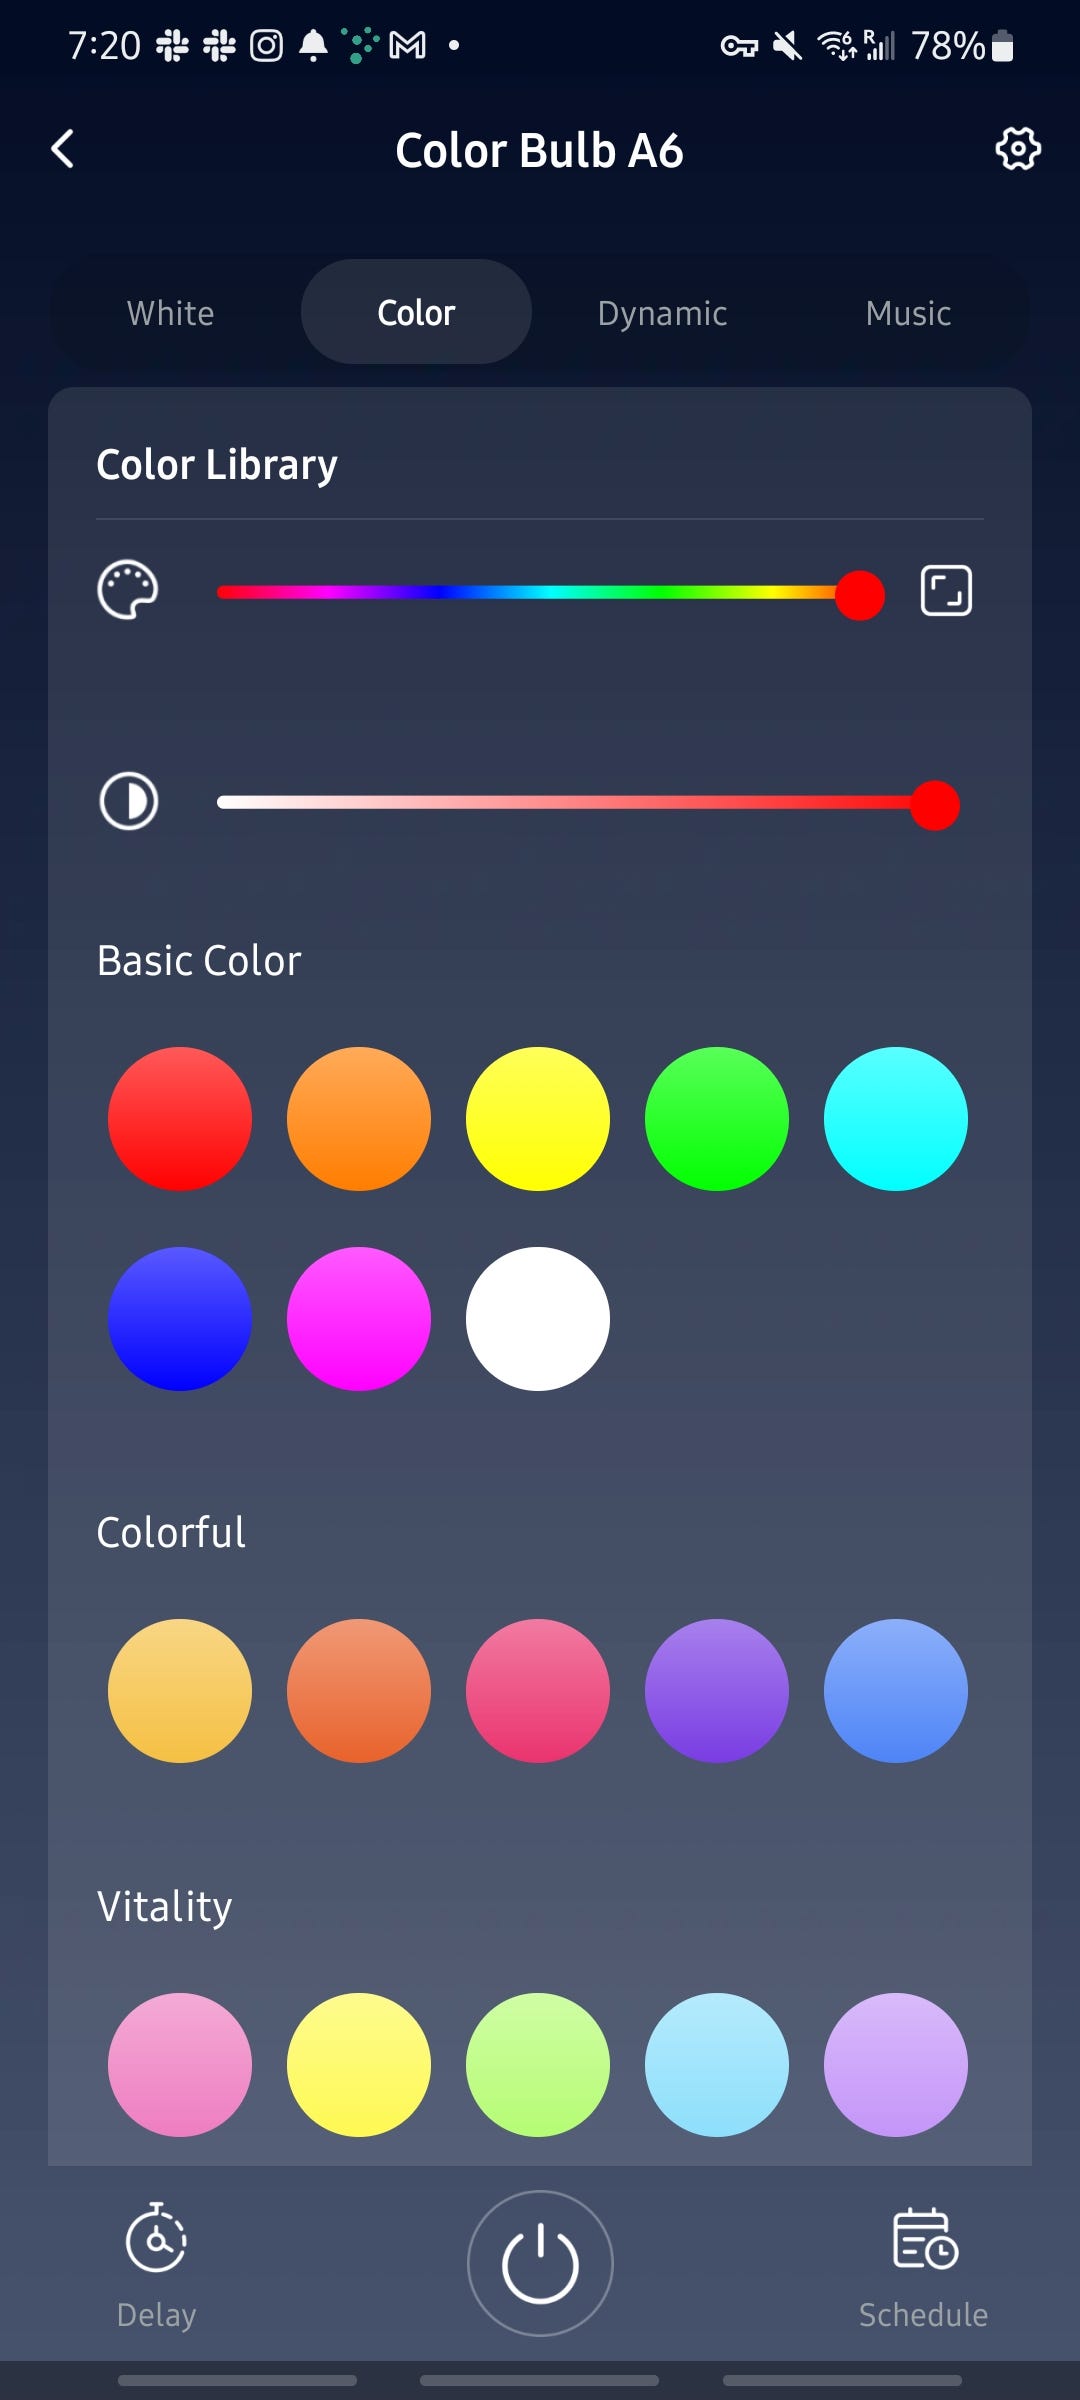 Selecting a color for the SwitchBot Color Bulb in the app